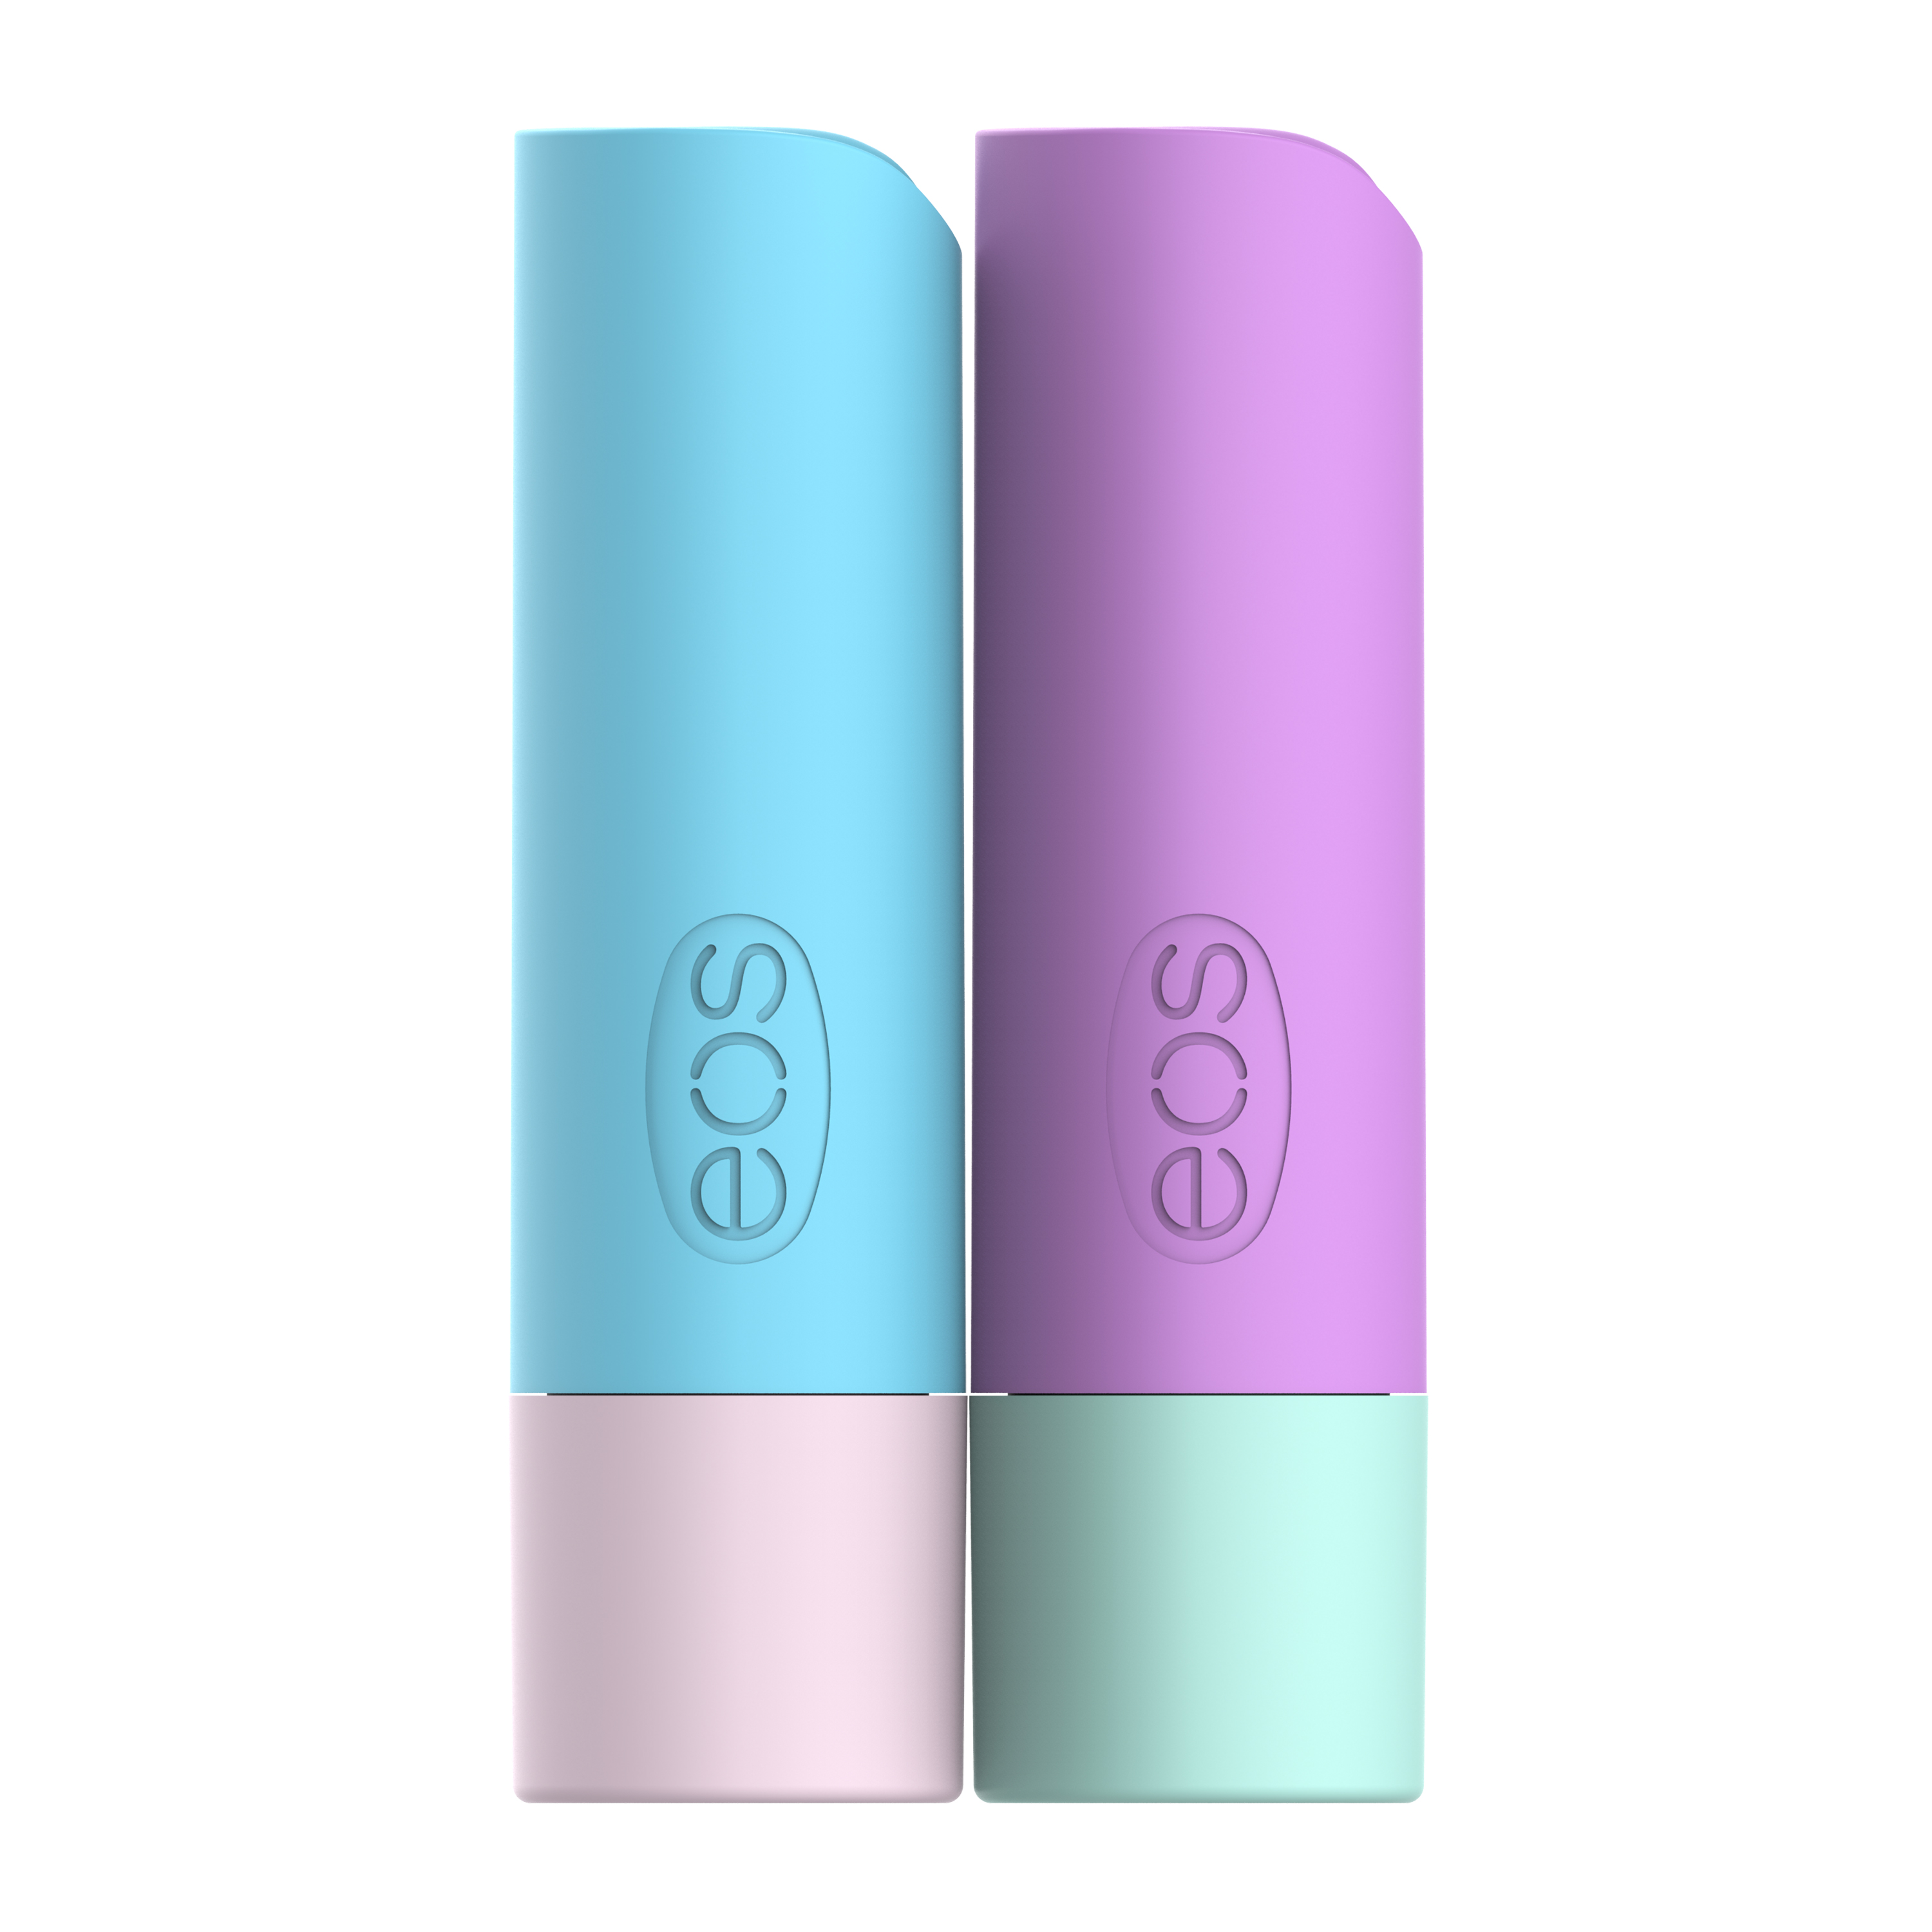 eos flavorlab Stick Lip Balm - Beach Coconut and Eucalyptus | 0.14 oz | 2-pack - image 2 of 3